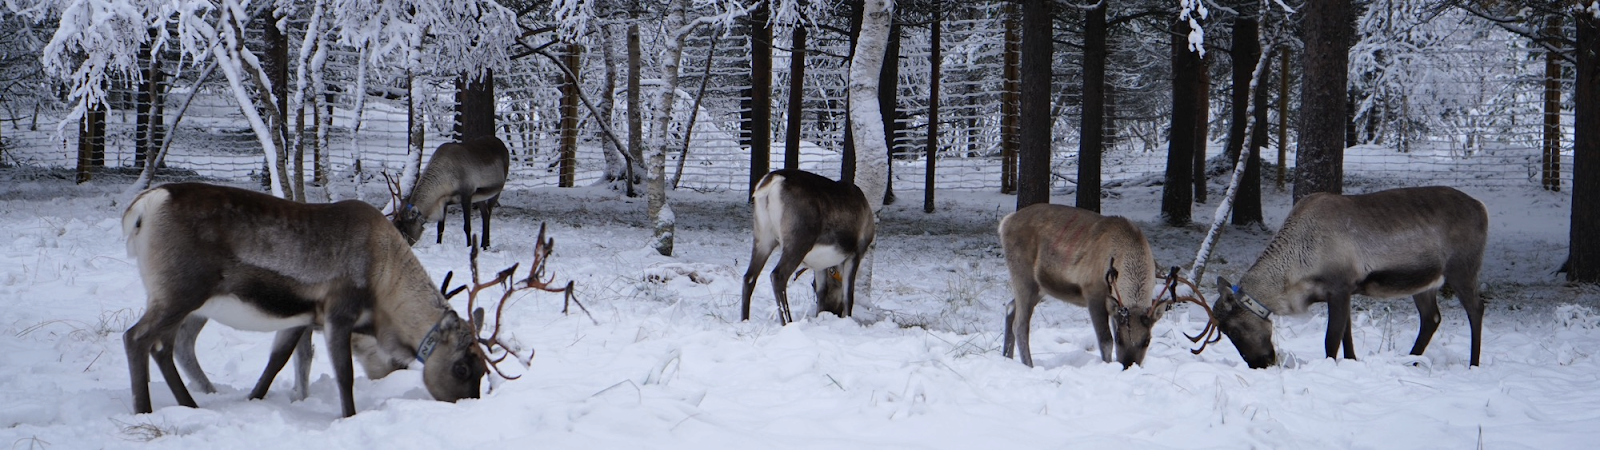 A group of deer in the snow

Description automatically generated